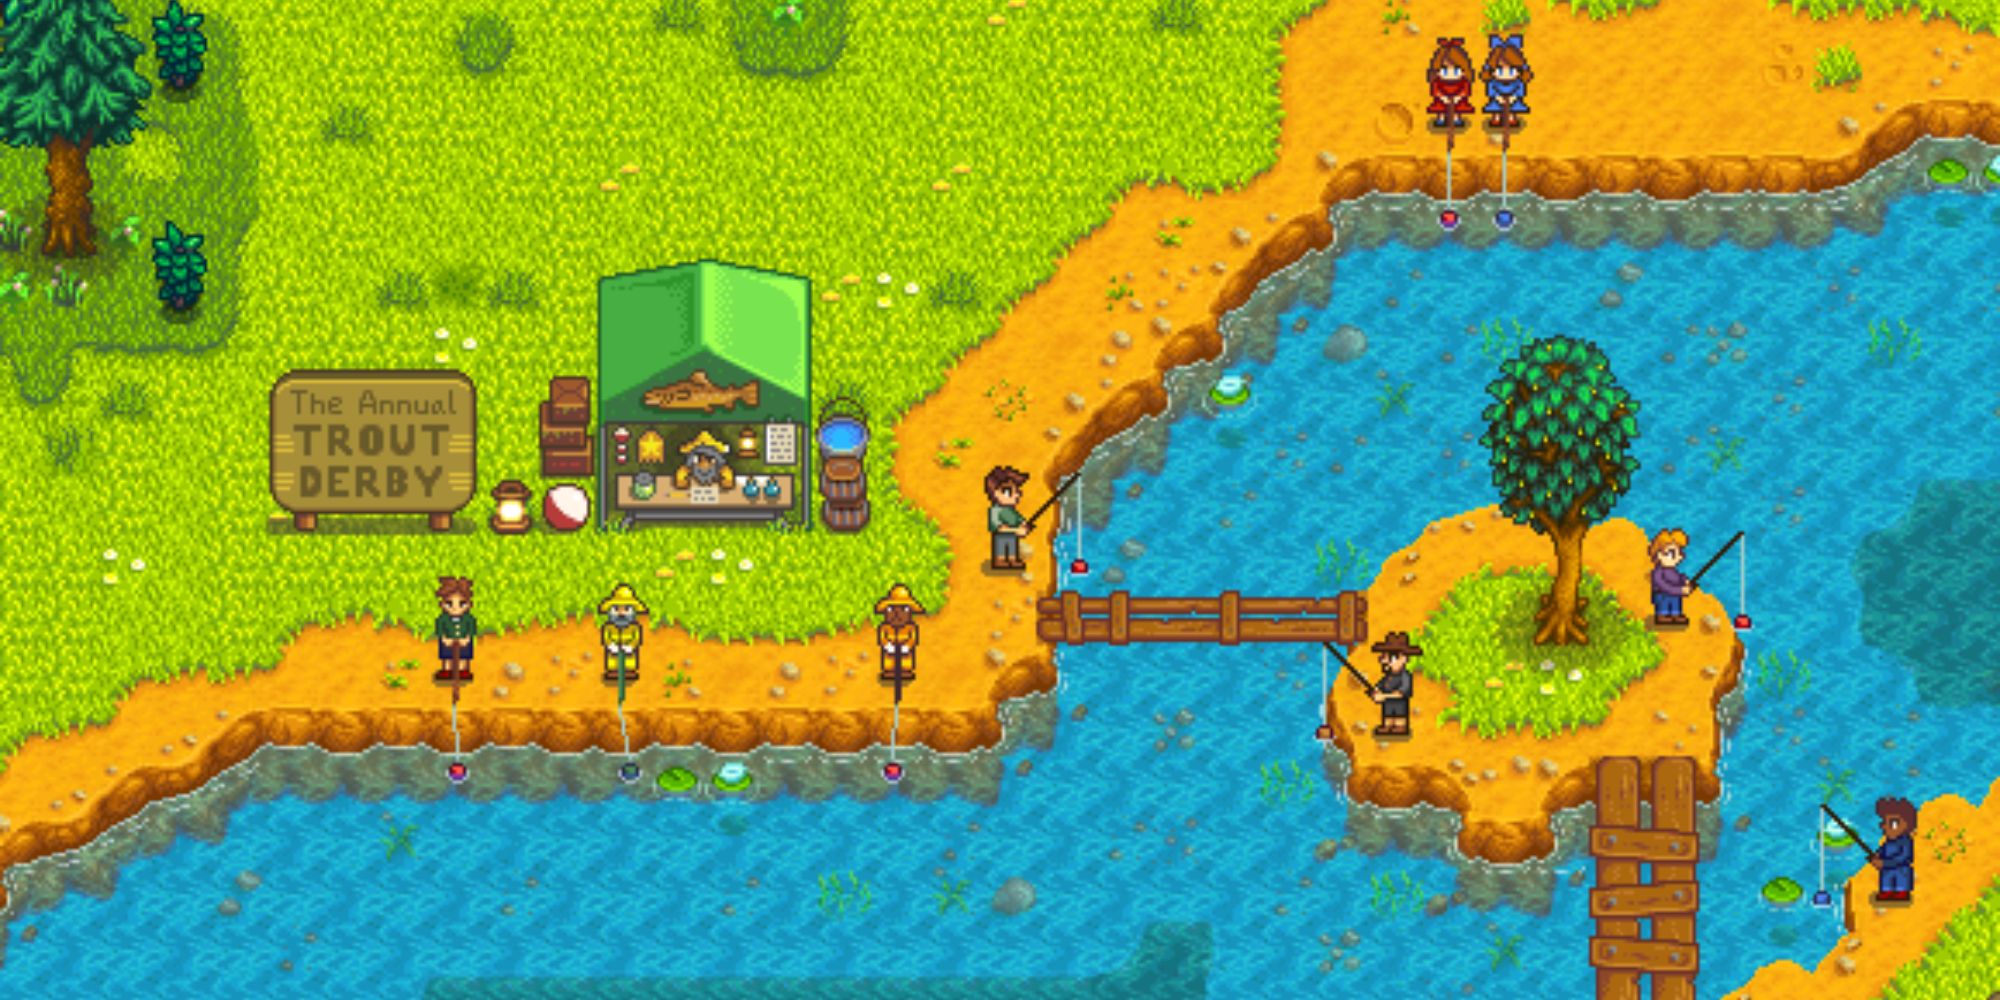 An image from Stardew Valley of the Trout Derby Event, which requires you to catch Rainbow Trout with special tags on them in exchange for prizes.